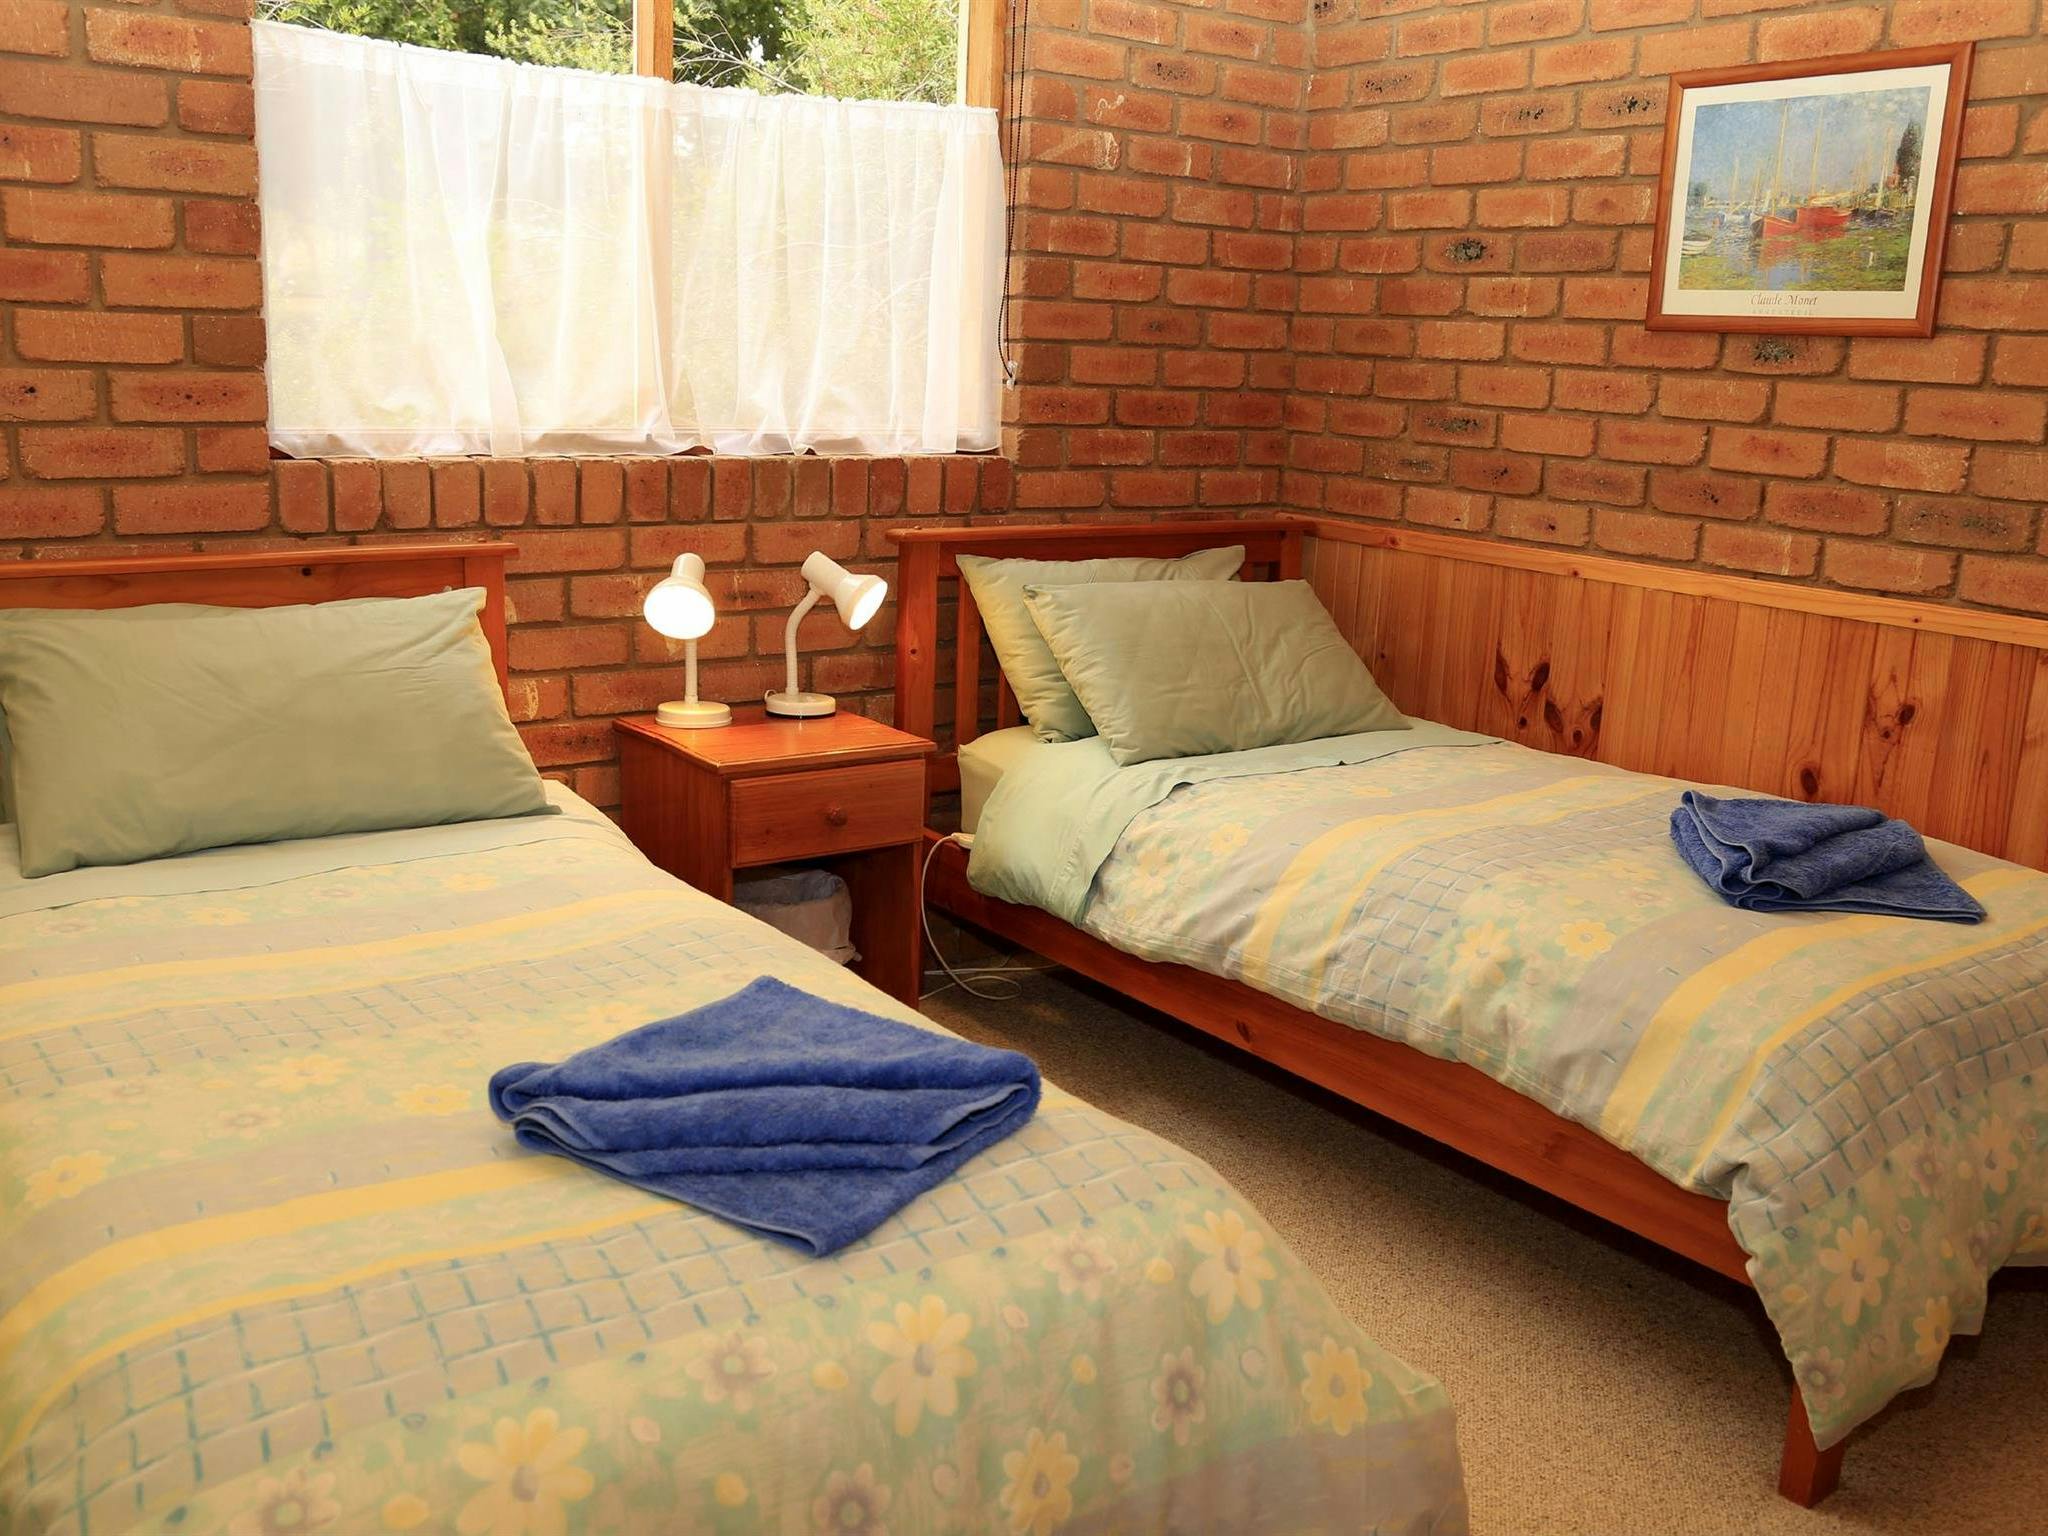 Second bedroom with two single beds